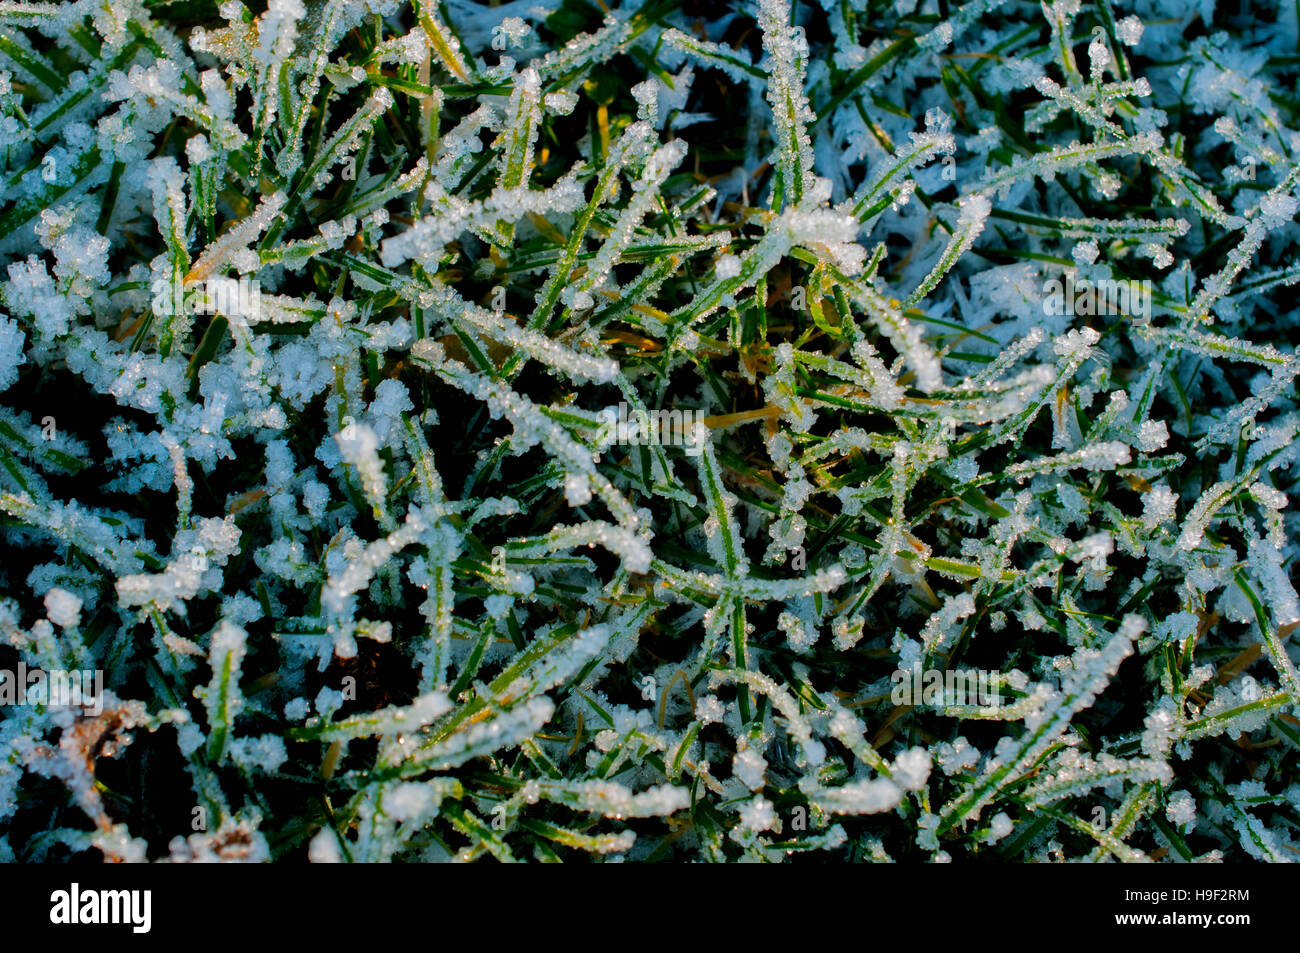 Frozen Ice Crystals on Grass Stock Photo